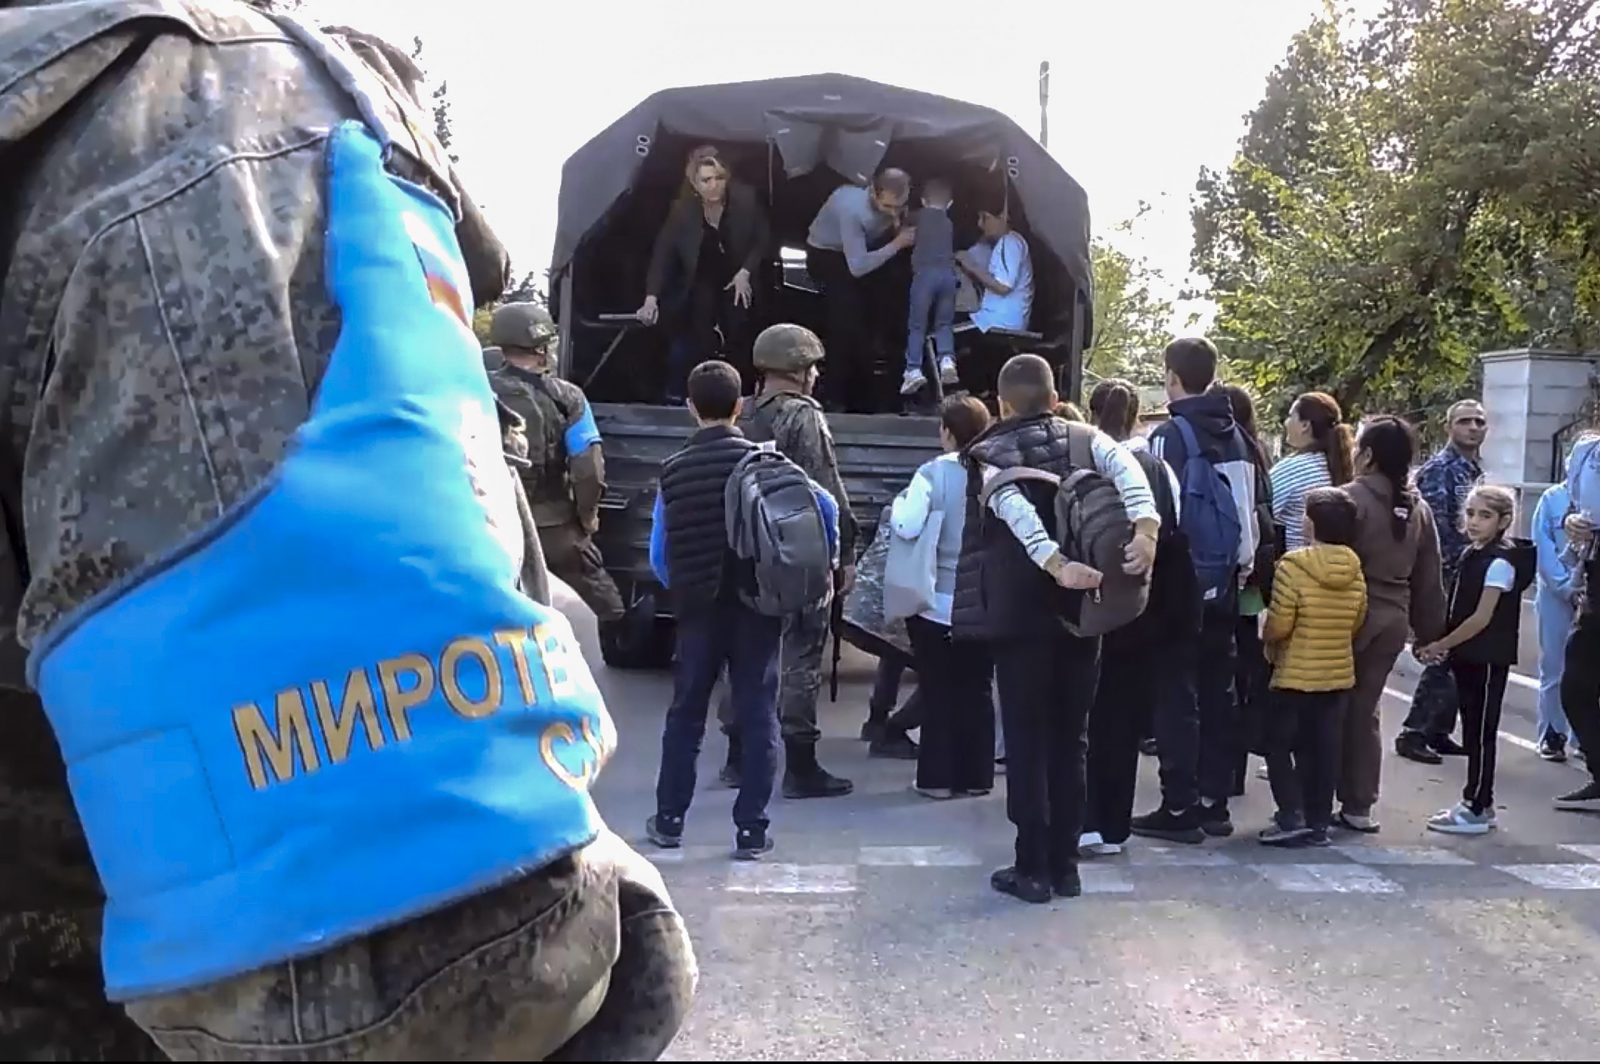 epa10871129 A still image taken from a handout video provided by the Russian Defence Ministry press-service shows Russian peacekeepers evacuating Nagorno-Karabakh civilians at an undisclosed location, 20 September 2023. More than two thousand civilians, including 1,049 children, were evacuated from the 'most dangerous areas' of Nagorno-Karabakh, the Russian ministry said, adding that since 12:00 pm on 19 September 2023, the Russian peacekeeping contingent recorded 'numerous facts of ceasefire violations on the Azerbaijani side along the entire line of contact'. Azerbaijan's Ministry of Defense announced on 19 September the launching of local 'anti-terrorism' measures against the Armenian military in the disputed Nagorno-Karabakh region in order to restore the constitutional order of Azerbaijan.  EPA/RUSSIAN DEFENCE MINISTRY PRESS SERVICE HANDOUT -- MANDATORY CREDIT -- BEST QUALITY AVAILABLE -- HANDOUT EDITORIAL USE ONLY/NO SALES